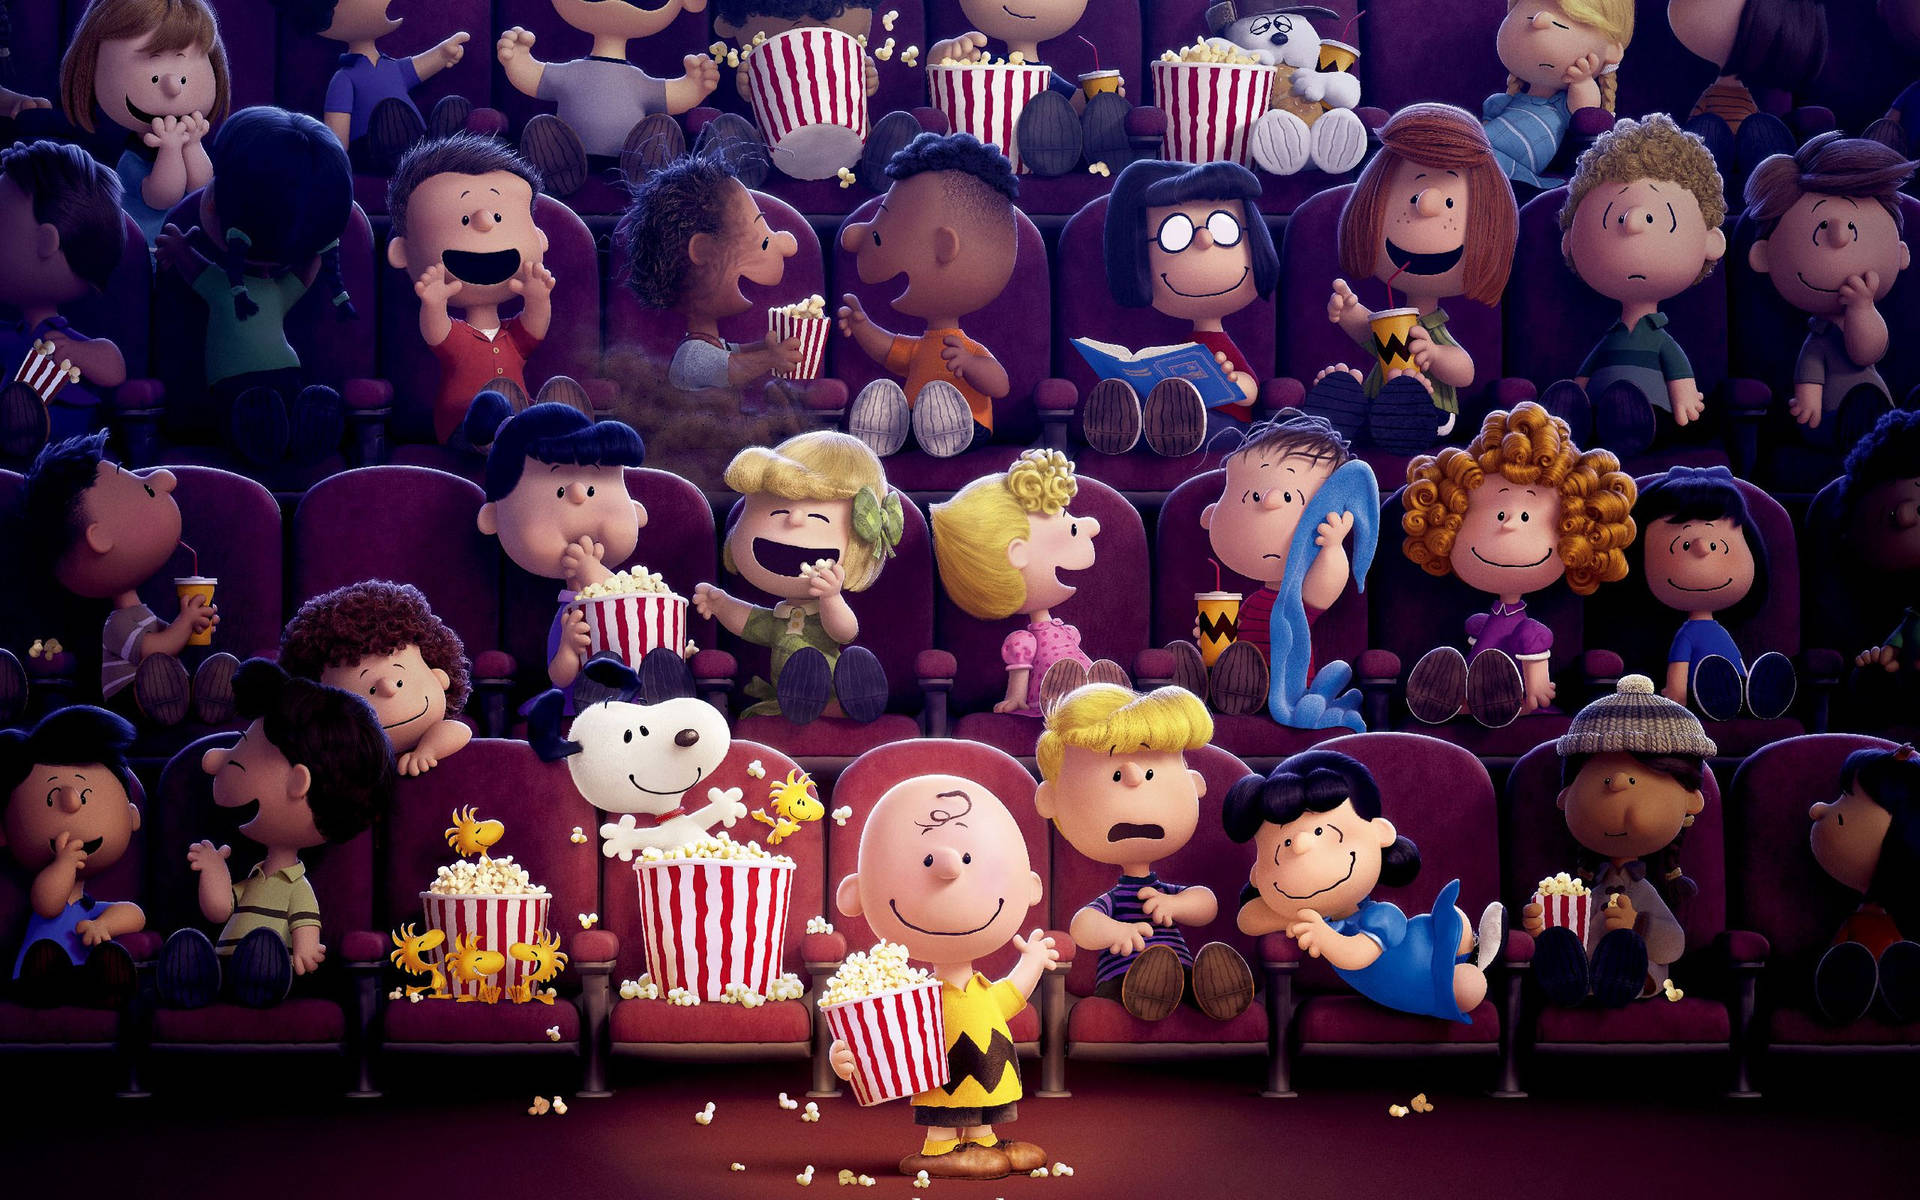 Celebrate The Holidays With The Peanuts Movie Wallpaper